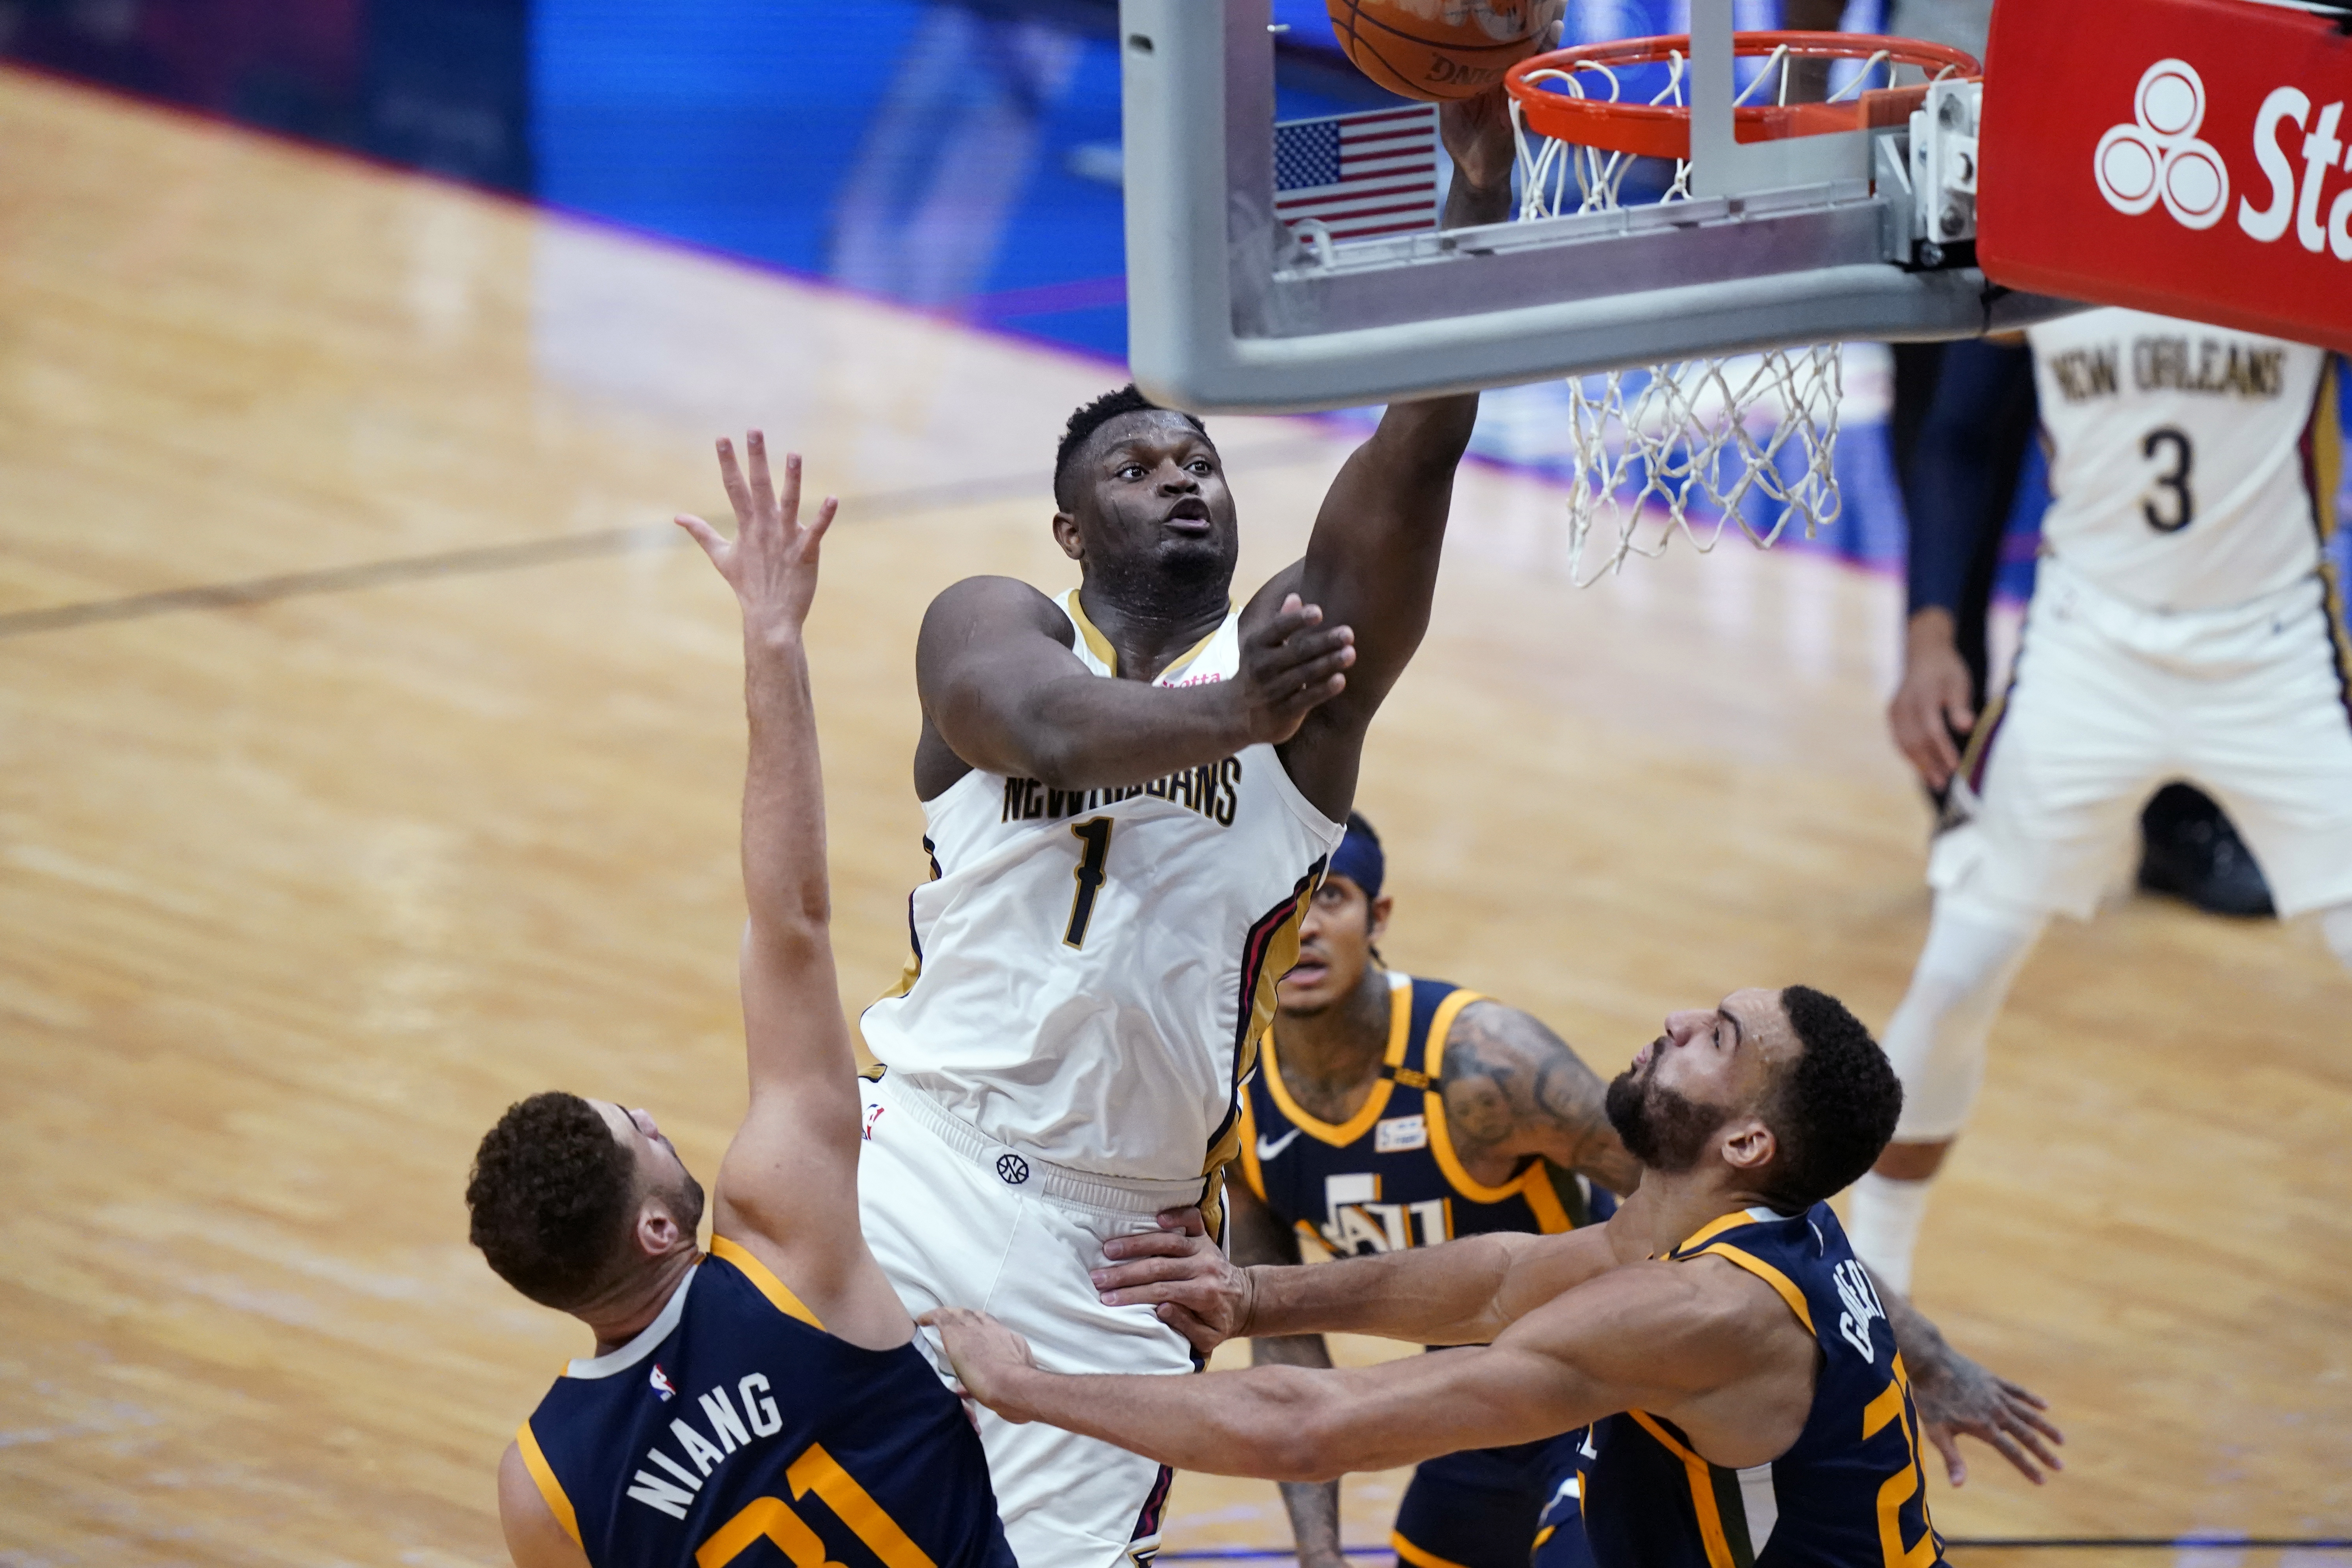 Zion, Pelicans hold off NBA-leading Jazz 129-124